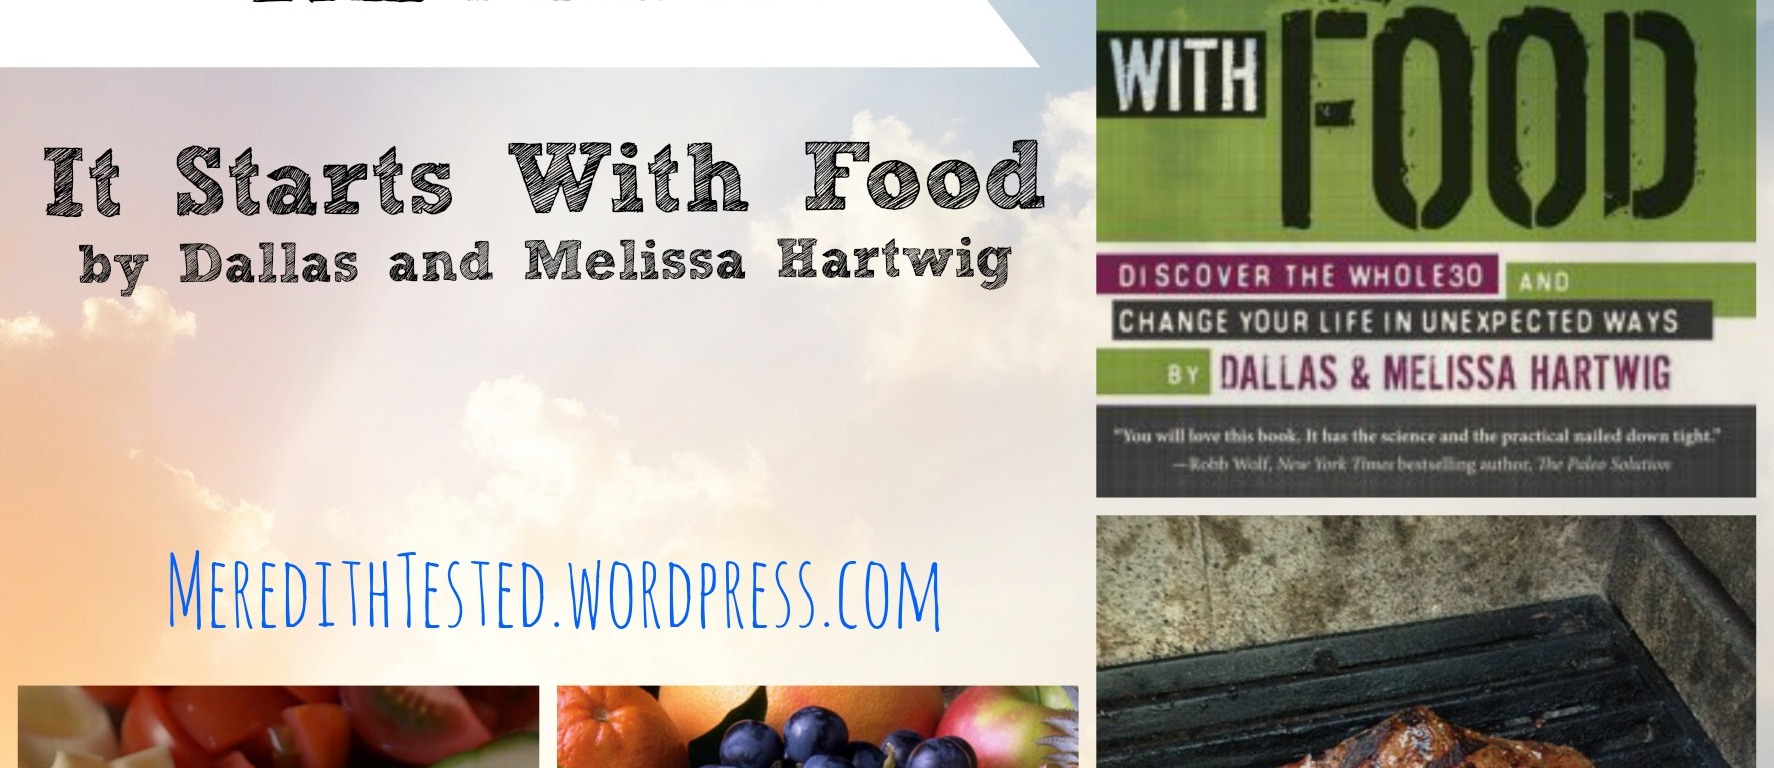 It Starts With Food Whole30 Review // MeredithTested.wordpress.com